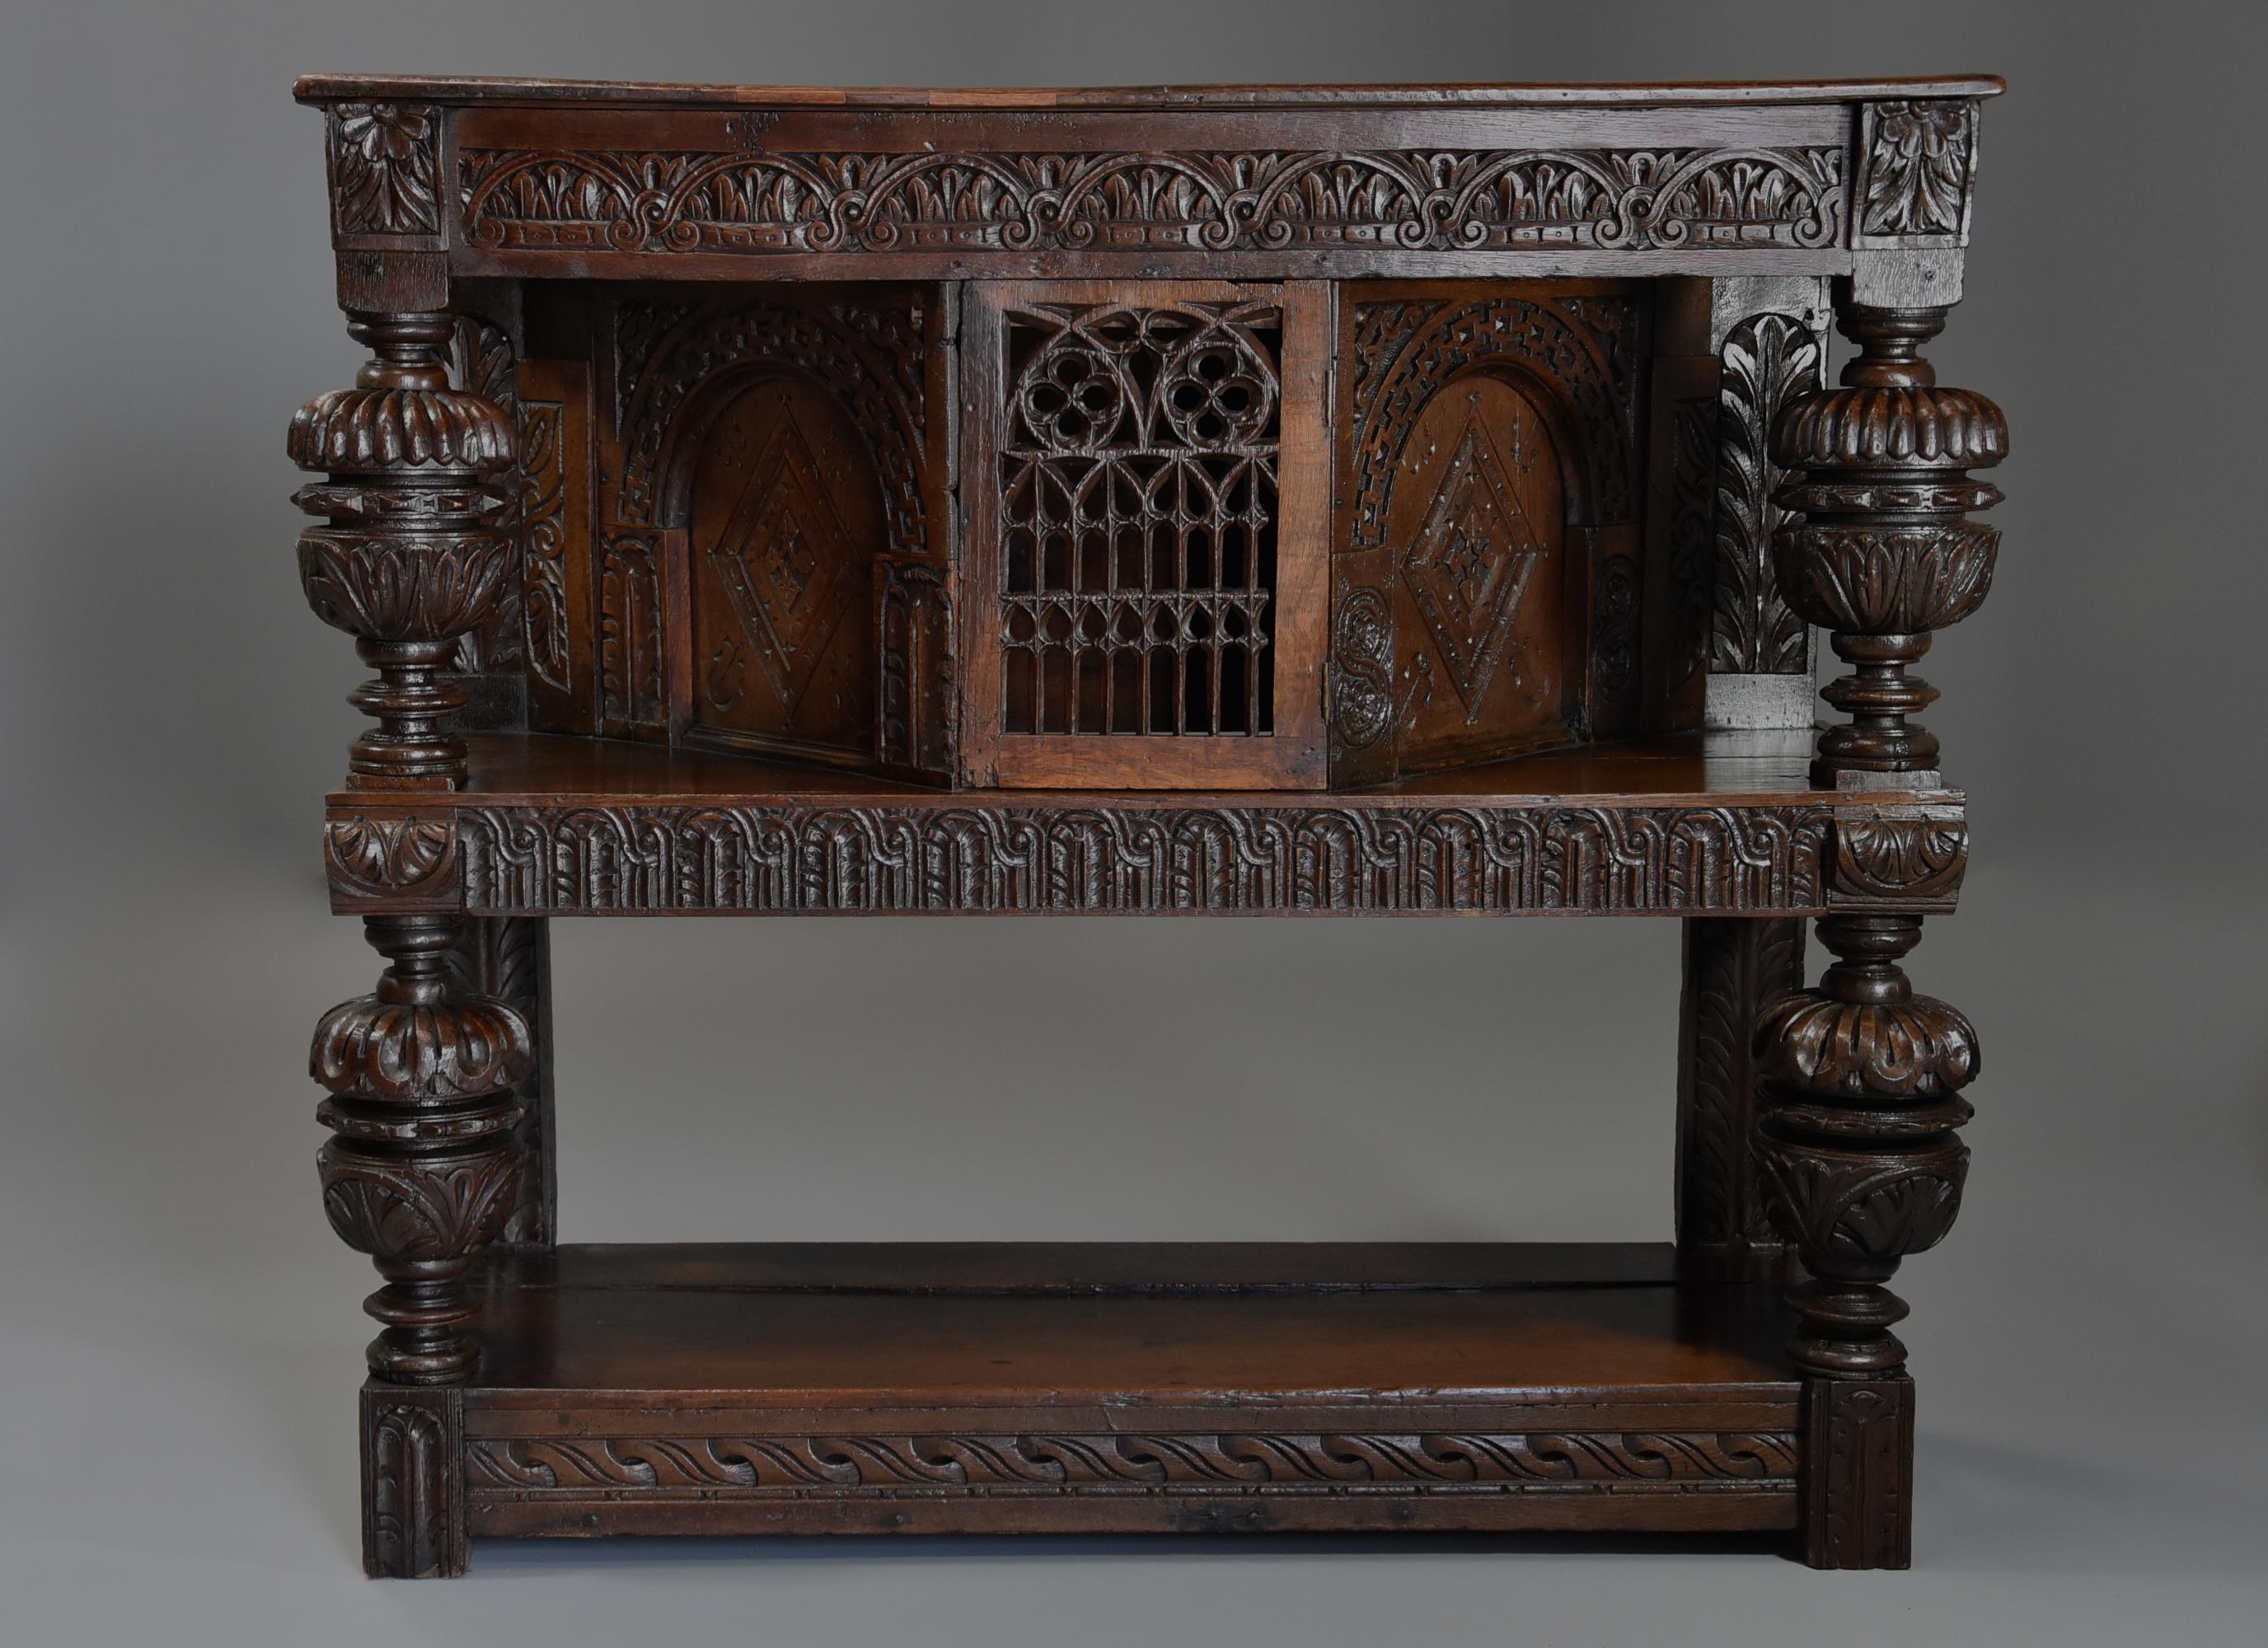 A superb oak livery cupboard constructed in the Victorian period of mainly 17th century carved pieces, the cupboard of very good proportions and of wonderful patina (colour).

This livery cupboard consists of a two plank top with some old